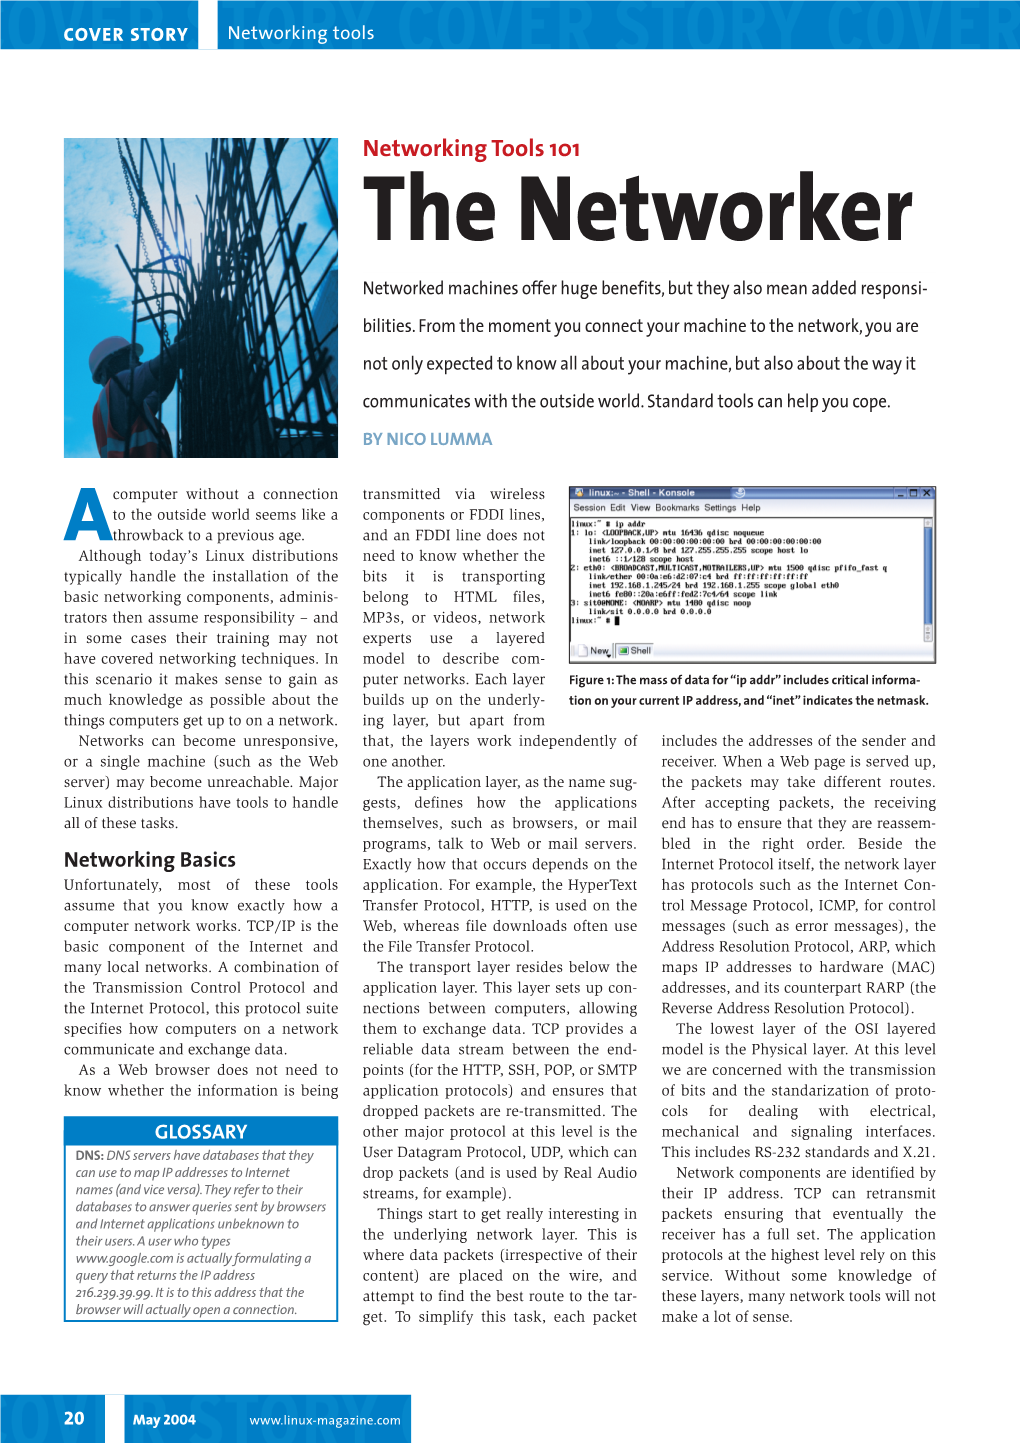 The Networker Networked Machines Offer Huge Benefits, but They Also Mean Added Responsi- Bilities